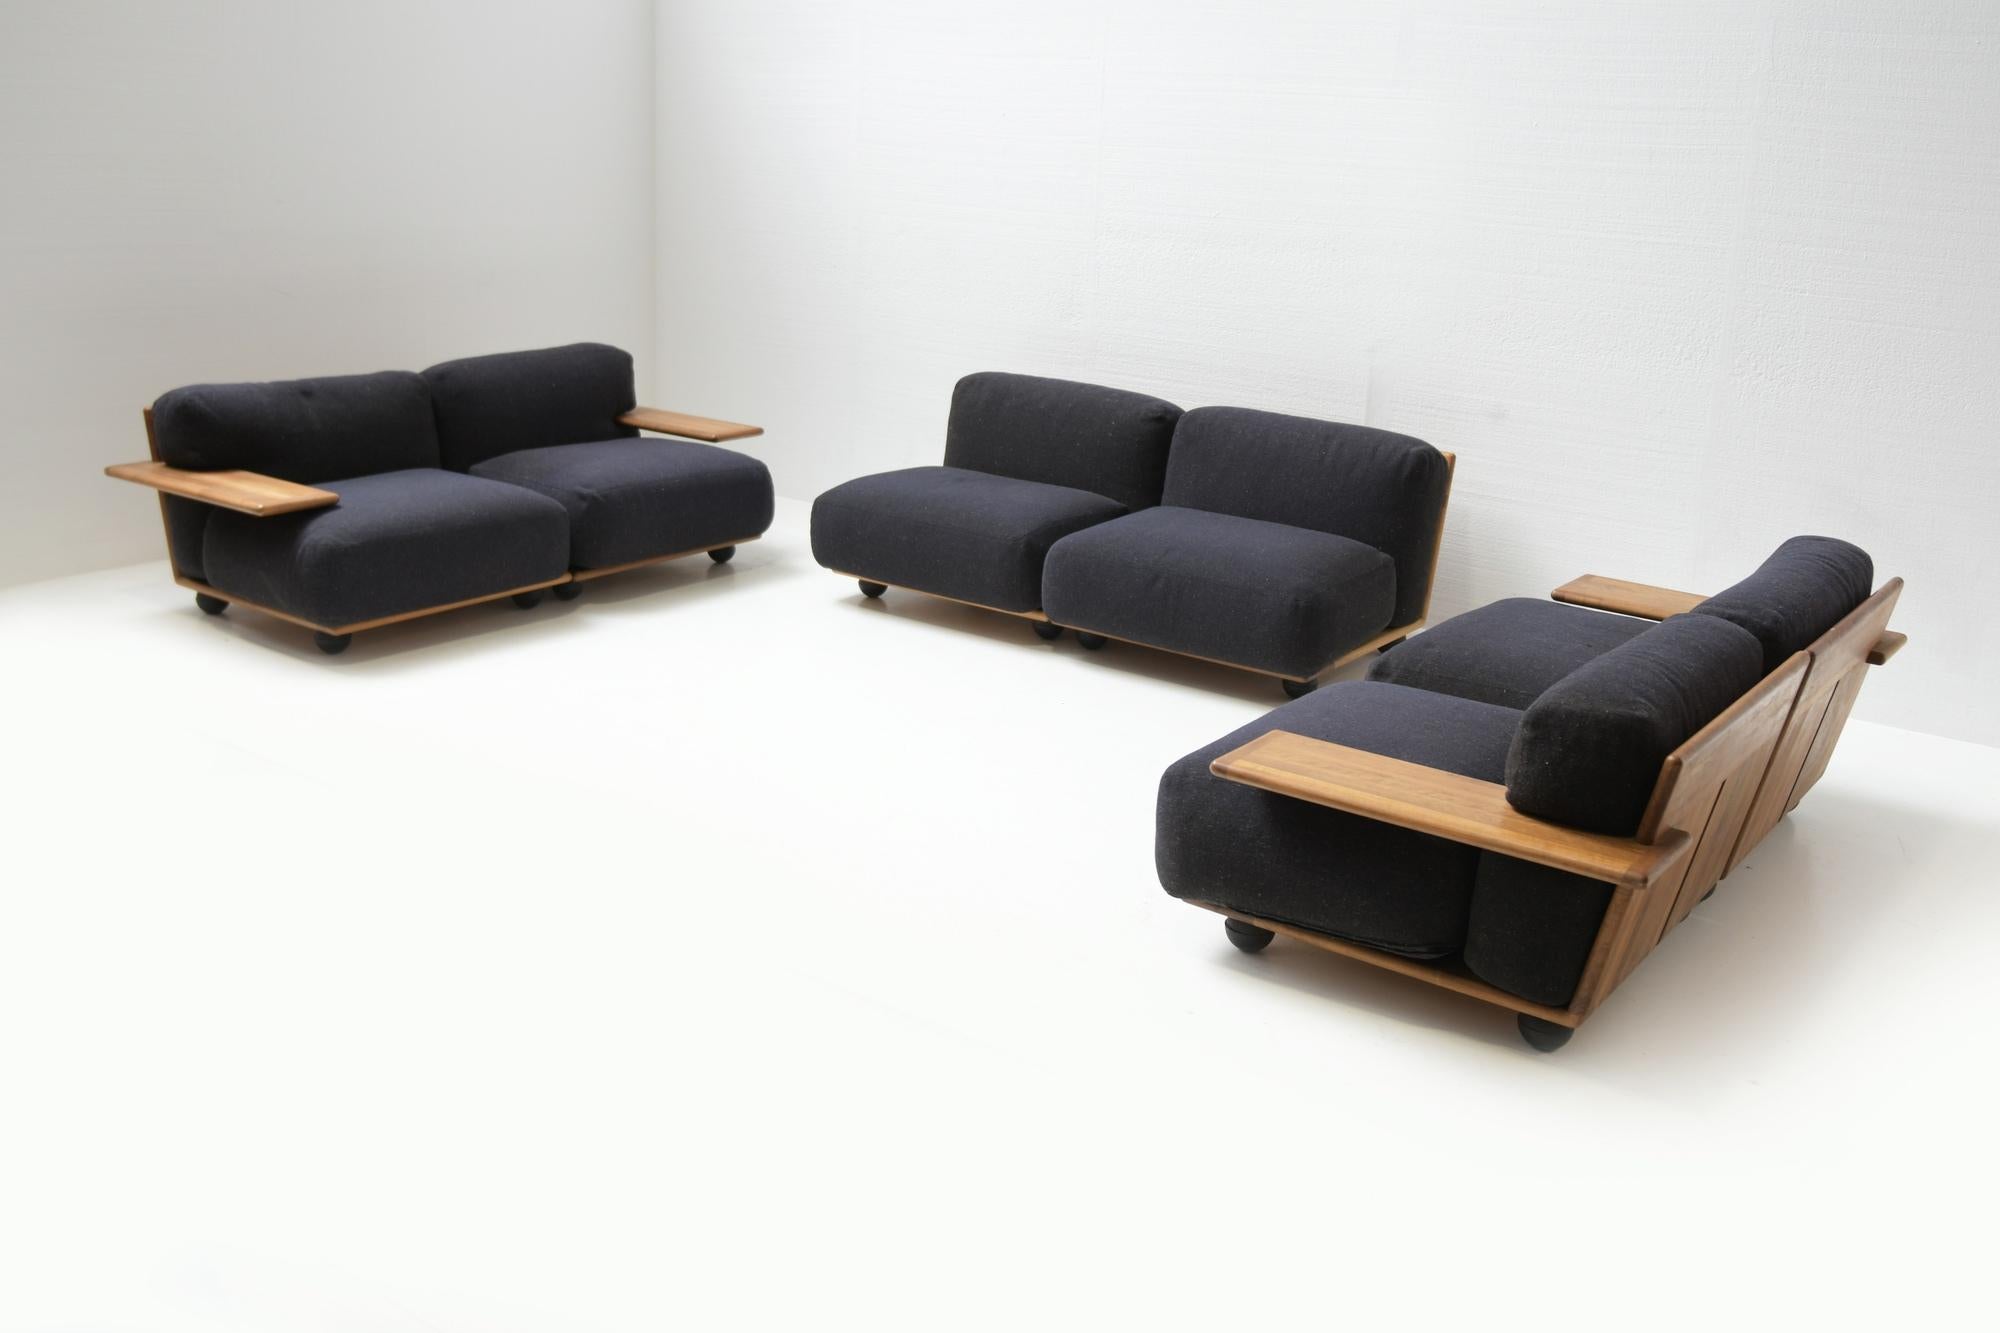 Stunning, rare & complete Pianura seating group by Mario Bellini for Cassina in the 1970s. 
Solid walnut wooden frame. The cushions still have their original fabric. The color is dark blue / dark grey.

This set contains 2 modular 3 seater sofa’s